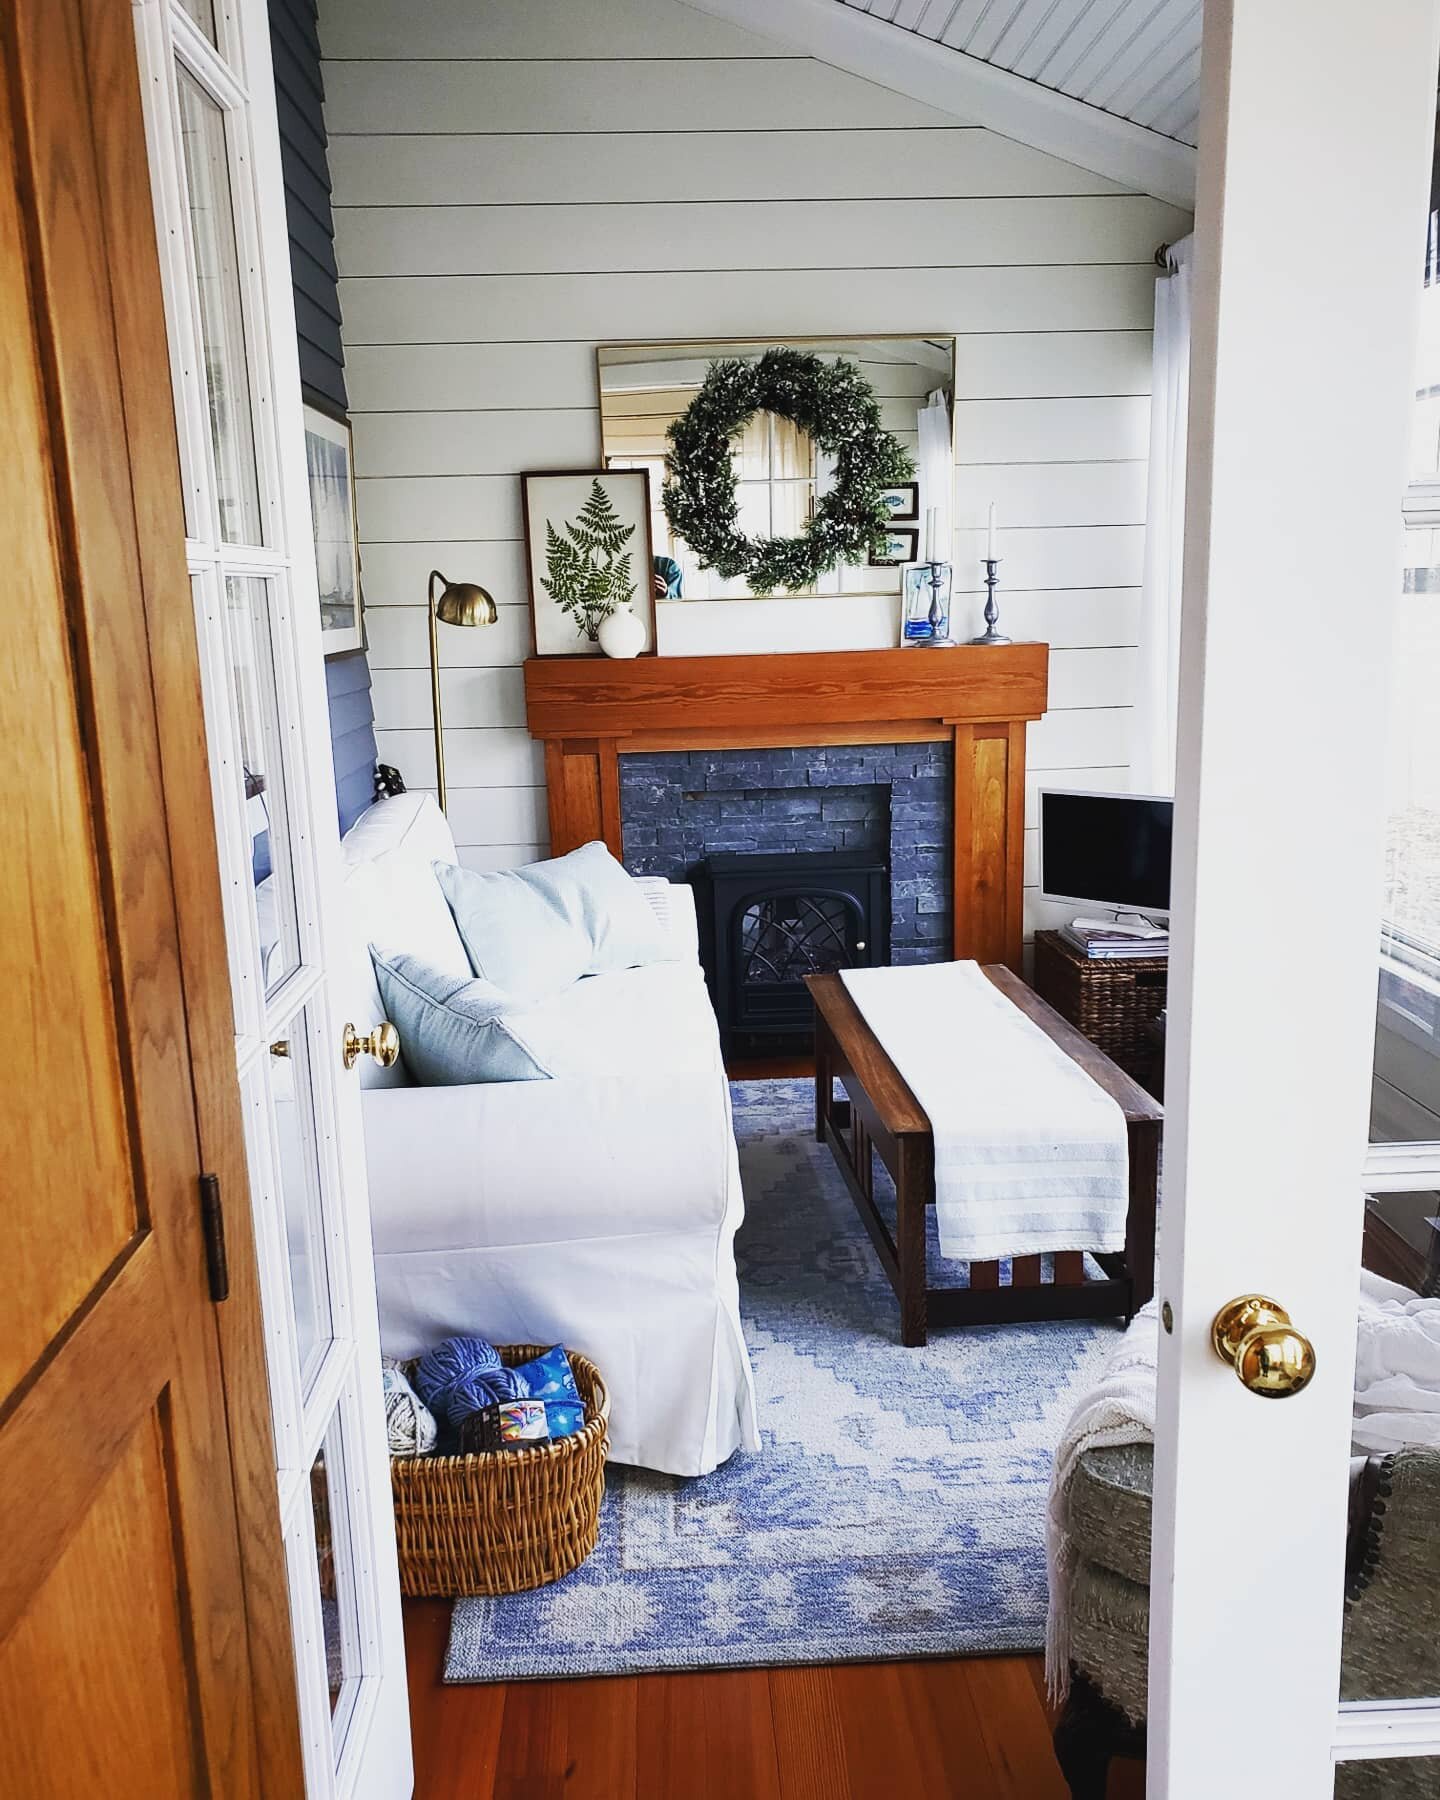 How to turn a rarely used front porch into a cozy room. Swipe for the before! #custommantel #customfrenchdoors #shiplapwalls